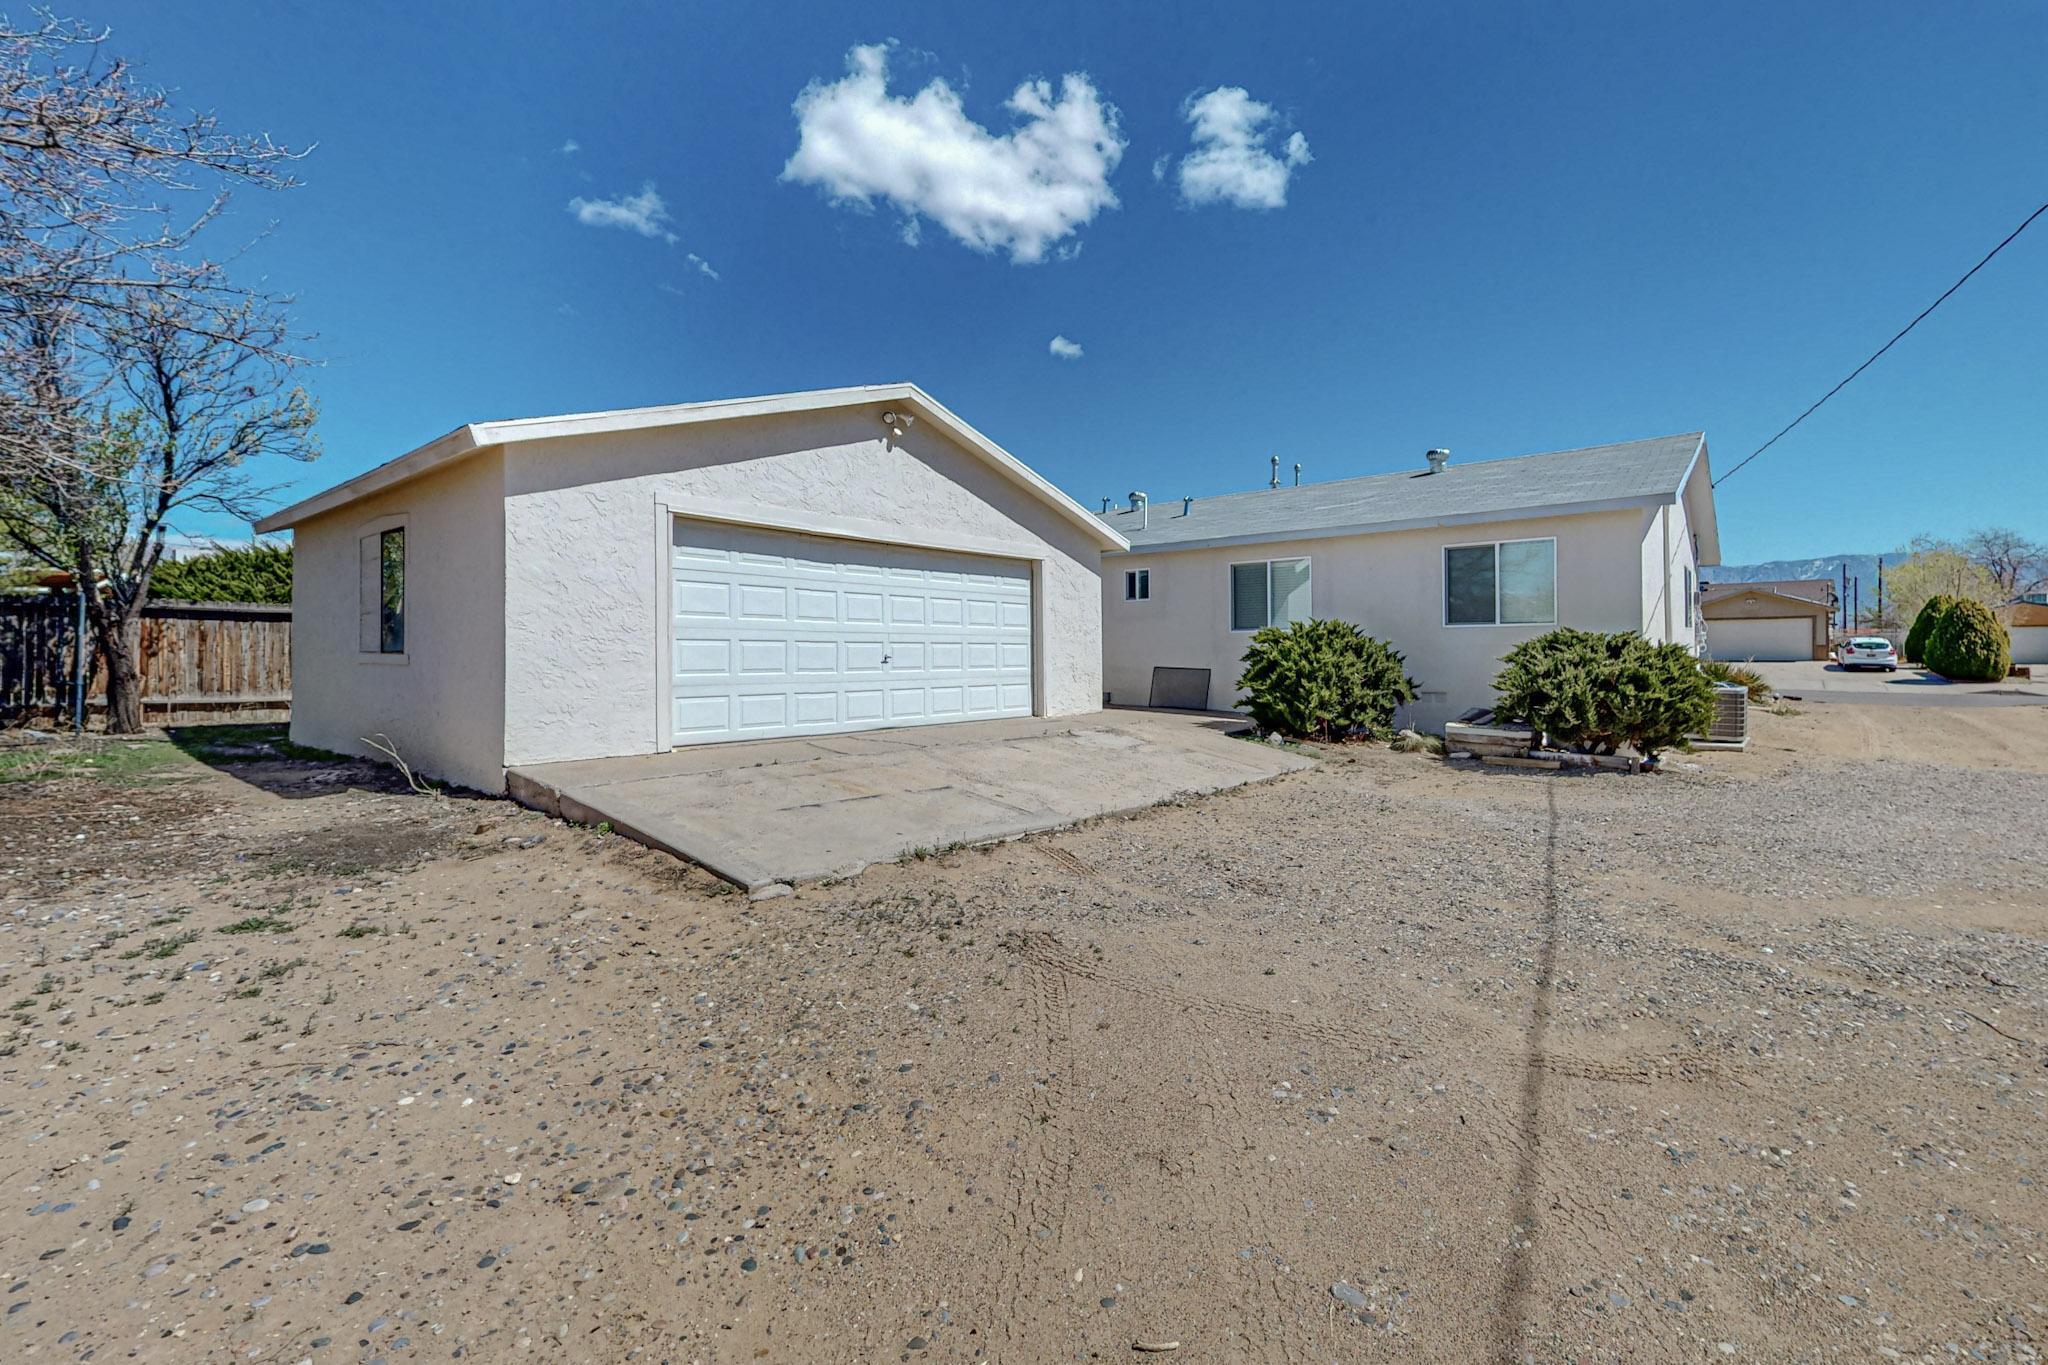 1721 32nd Street SE, Rio Rancho, New Mexico 87124, 3 Bedrooms Bedrooms, ,2 BathroomsBathrooms,Residential,For Sale,1721 32nd Street SE,1059383